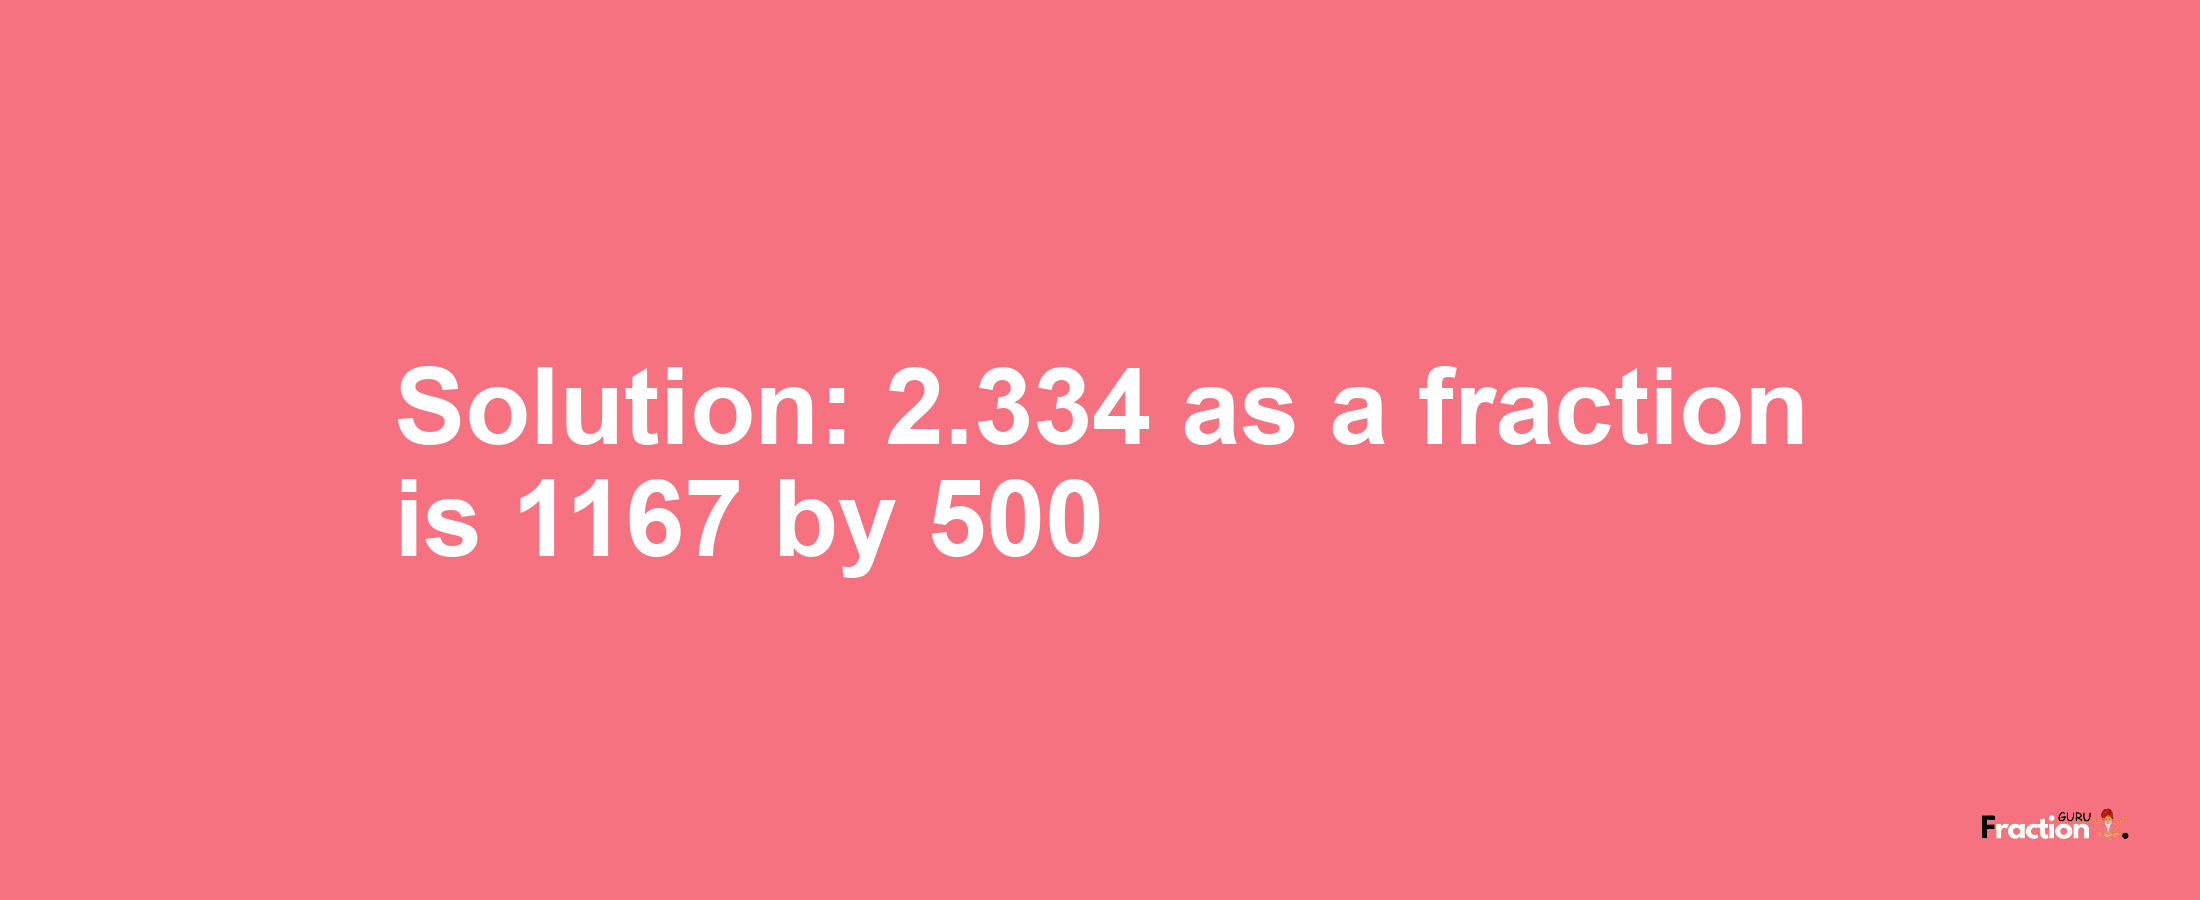 Solution:2.334 as a fraction is 1167/500